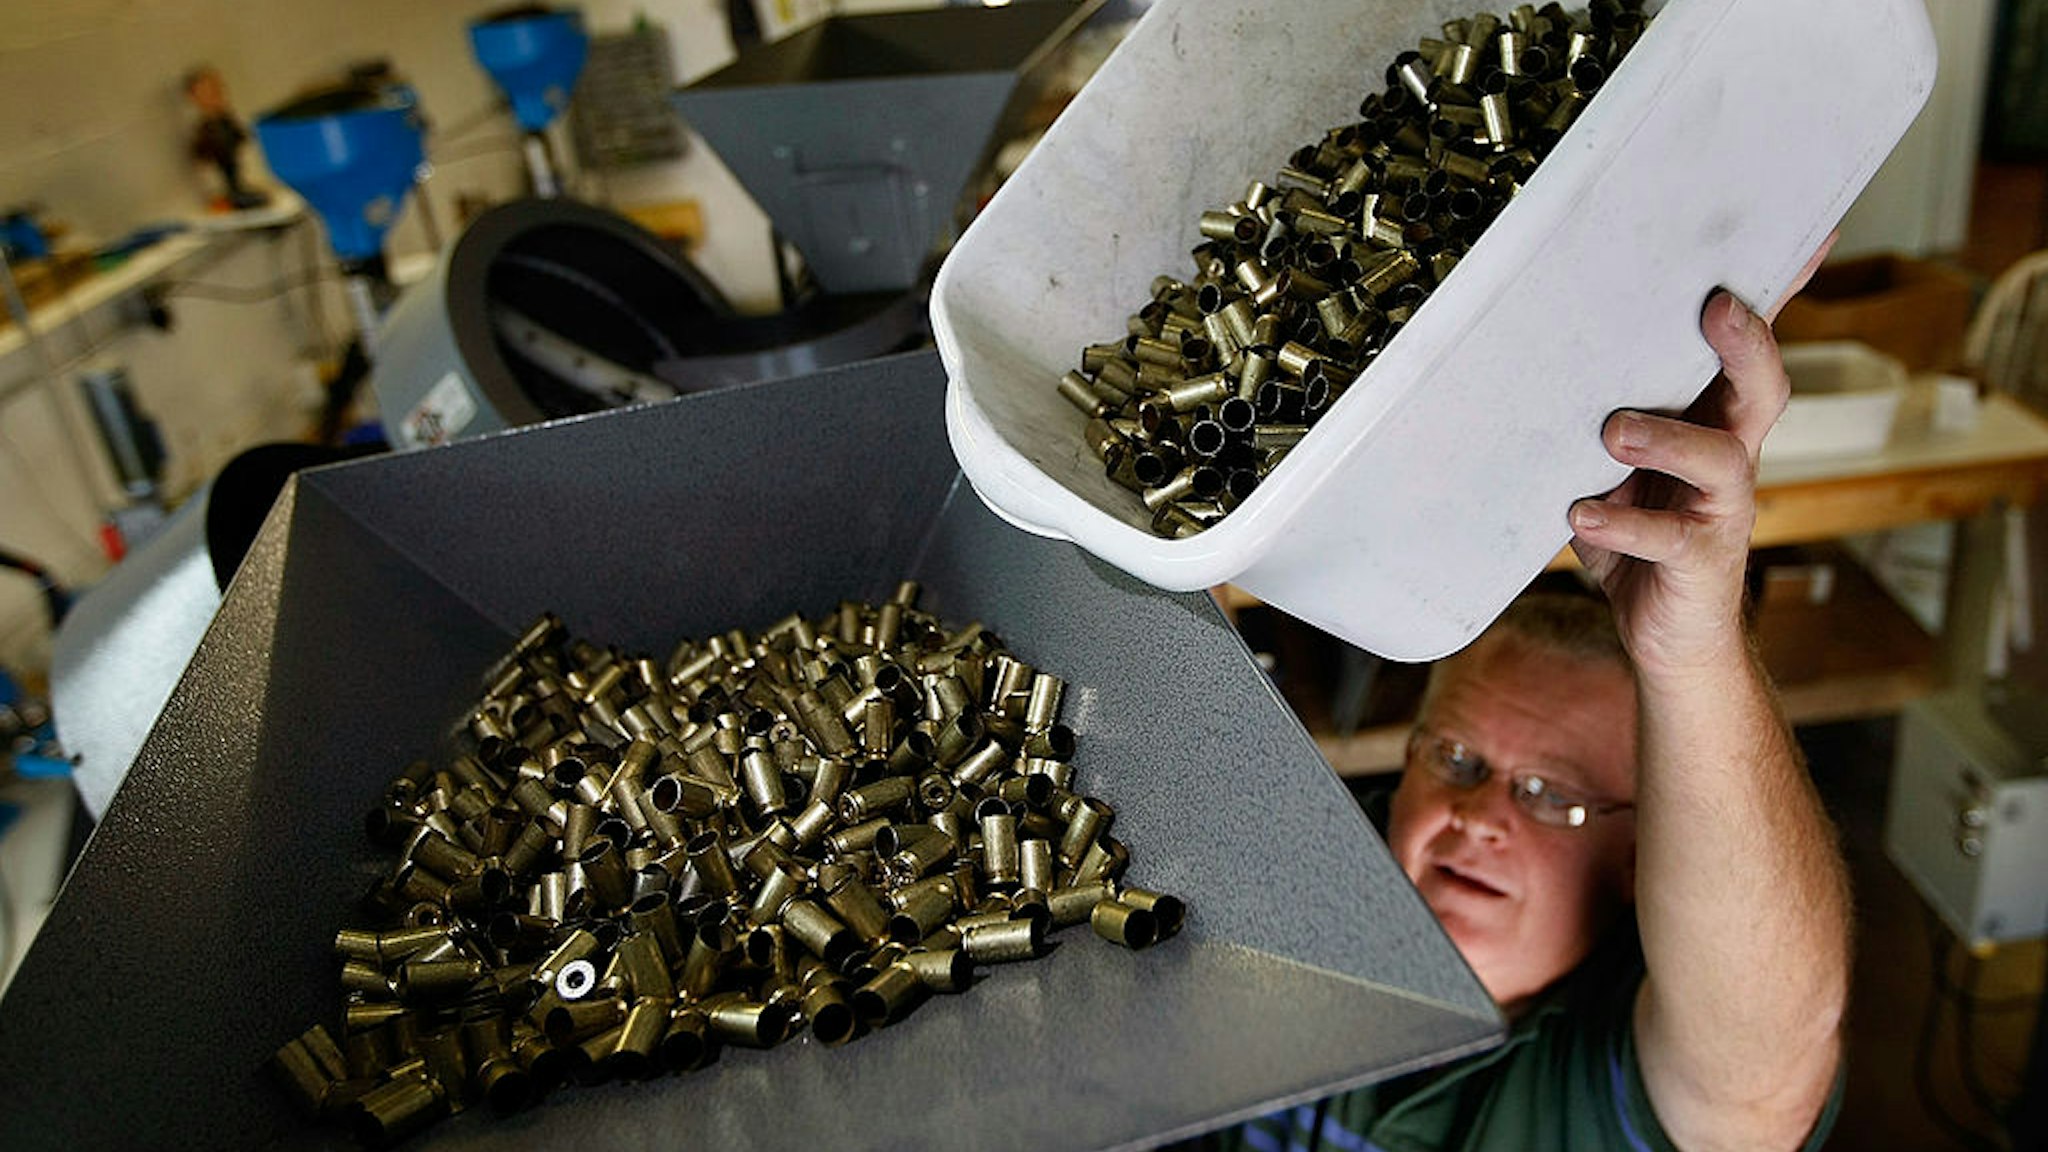 MIAMI - APRIL 09: Adolfo Vivas pours bullet casing into an ammuntion loader as they manufacture 45 caliber cartridges at Stone Hart manufacturing, Co. April 9, 2009 in Miami, Florida. Ammunition suppliers nationwide are reporting a shortage due in part to a sharp rise in gun sales after the election of President Obama that are said to be fueled by fears his administration will usher in more restrictive gun laws. Other factors for the shortage are reported to be the wars in Iraq and Afghanistan and fear of social upheaval due to the worsening economy. (Photo by Joe Raedle/Getty Images)